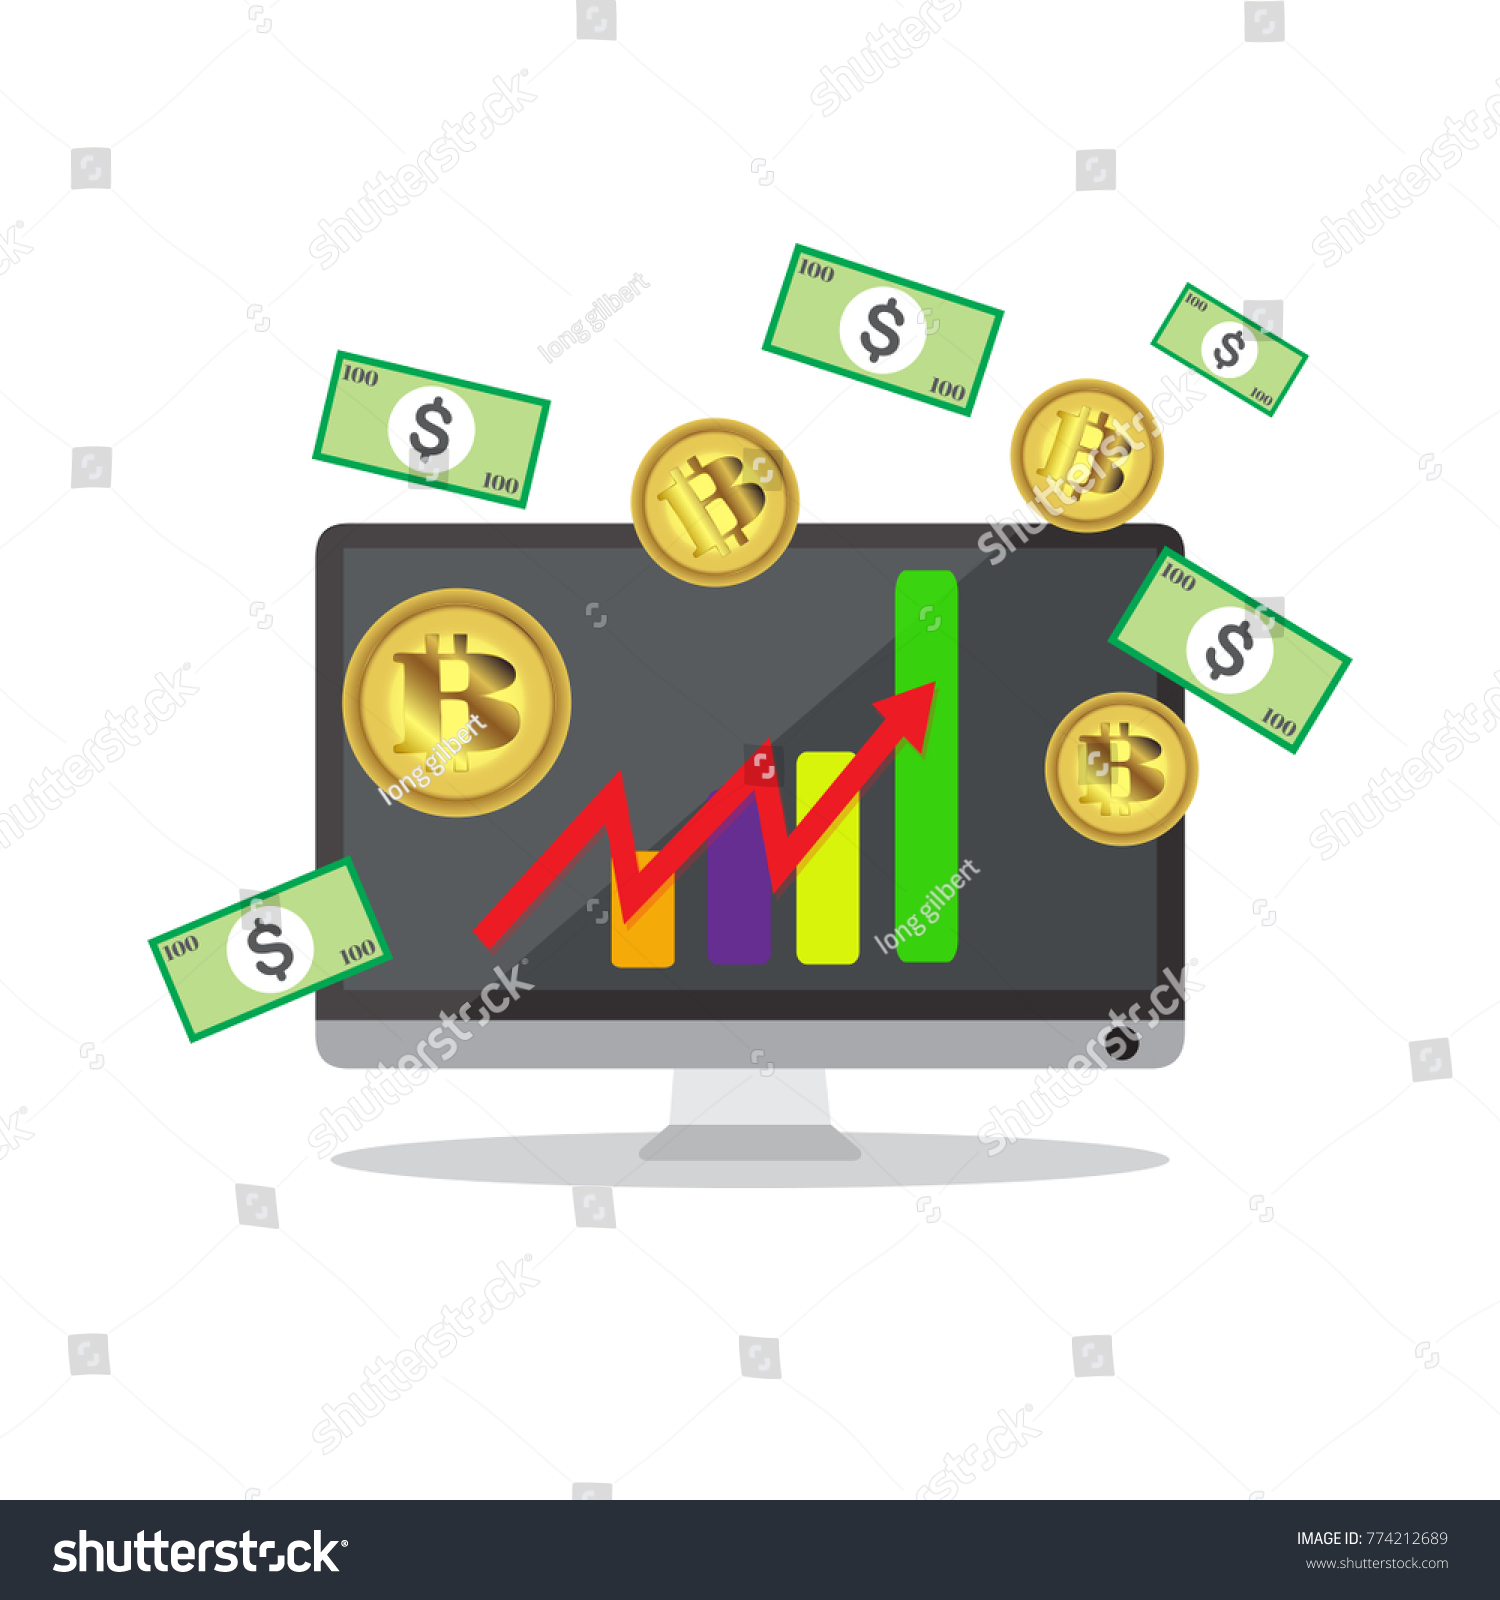 SVG of Bitcoin growth concept Payment and trade on computer symbol Bitcoin revenue illustration Stacks of gold coins like income graph with bitcoin Vector illustration isolated on background svg